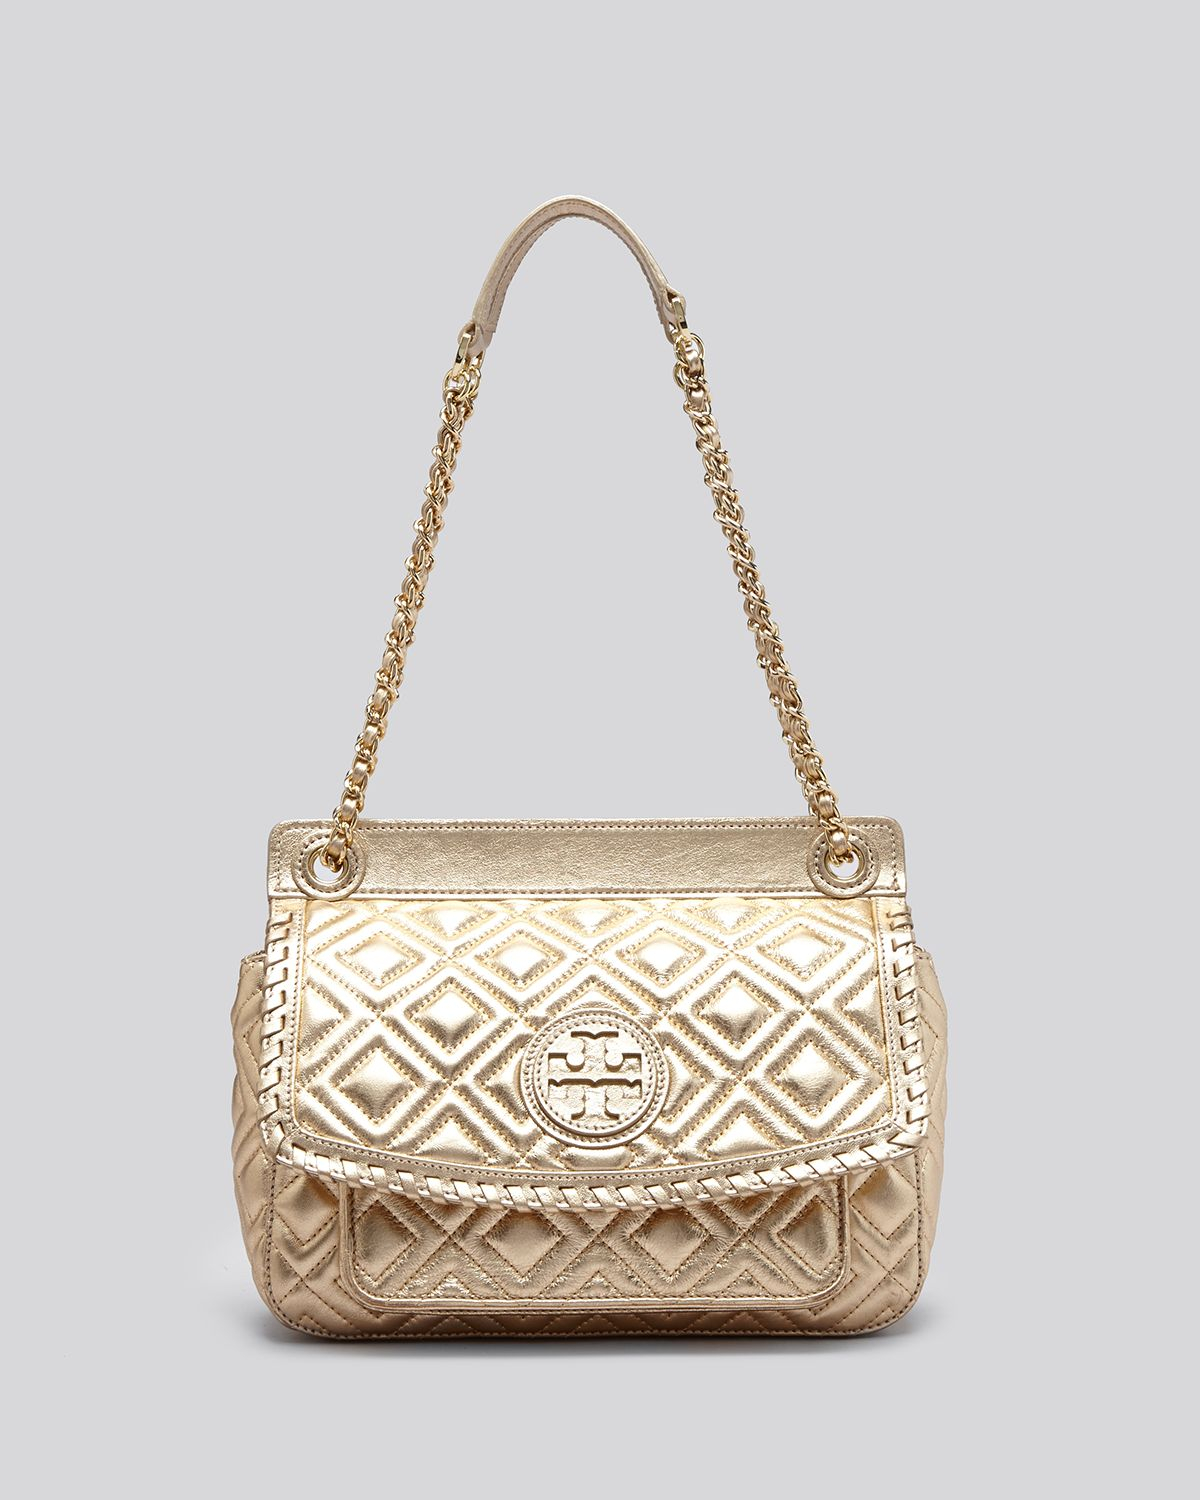 Tory burch Shoulder Bag - Small Marion Quilted Metallic in Metallic | Lyst